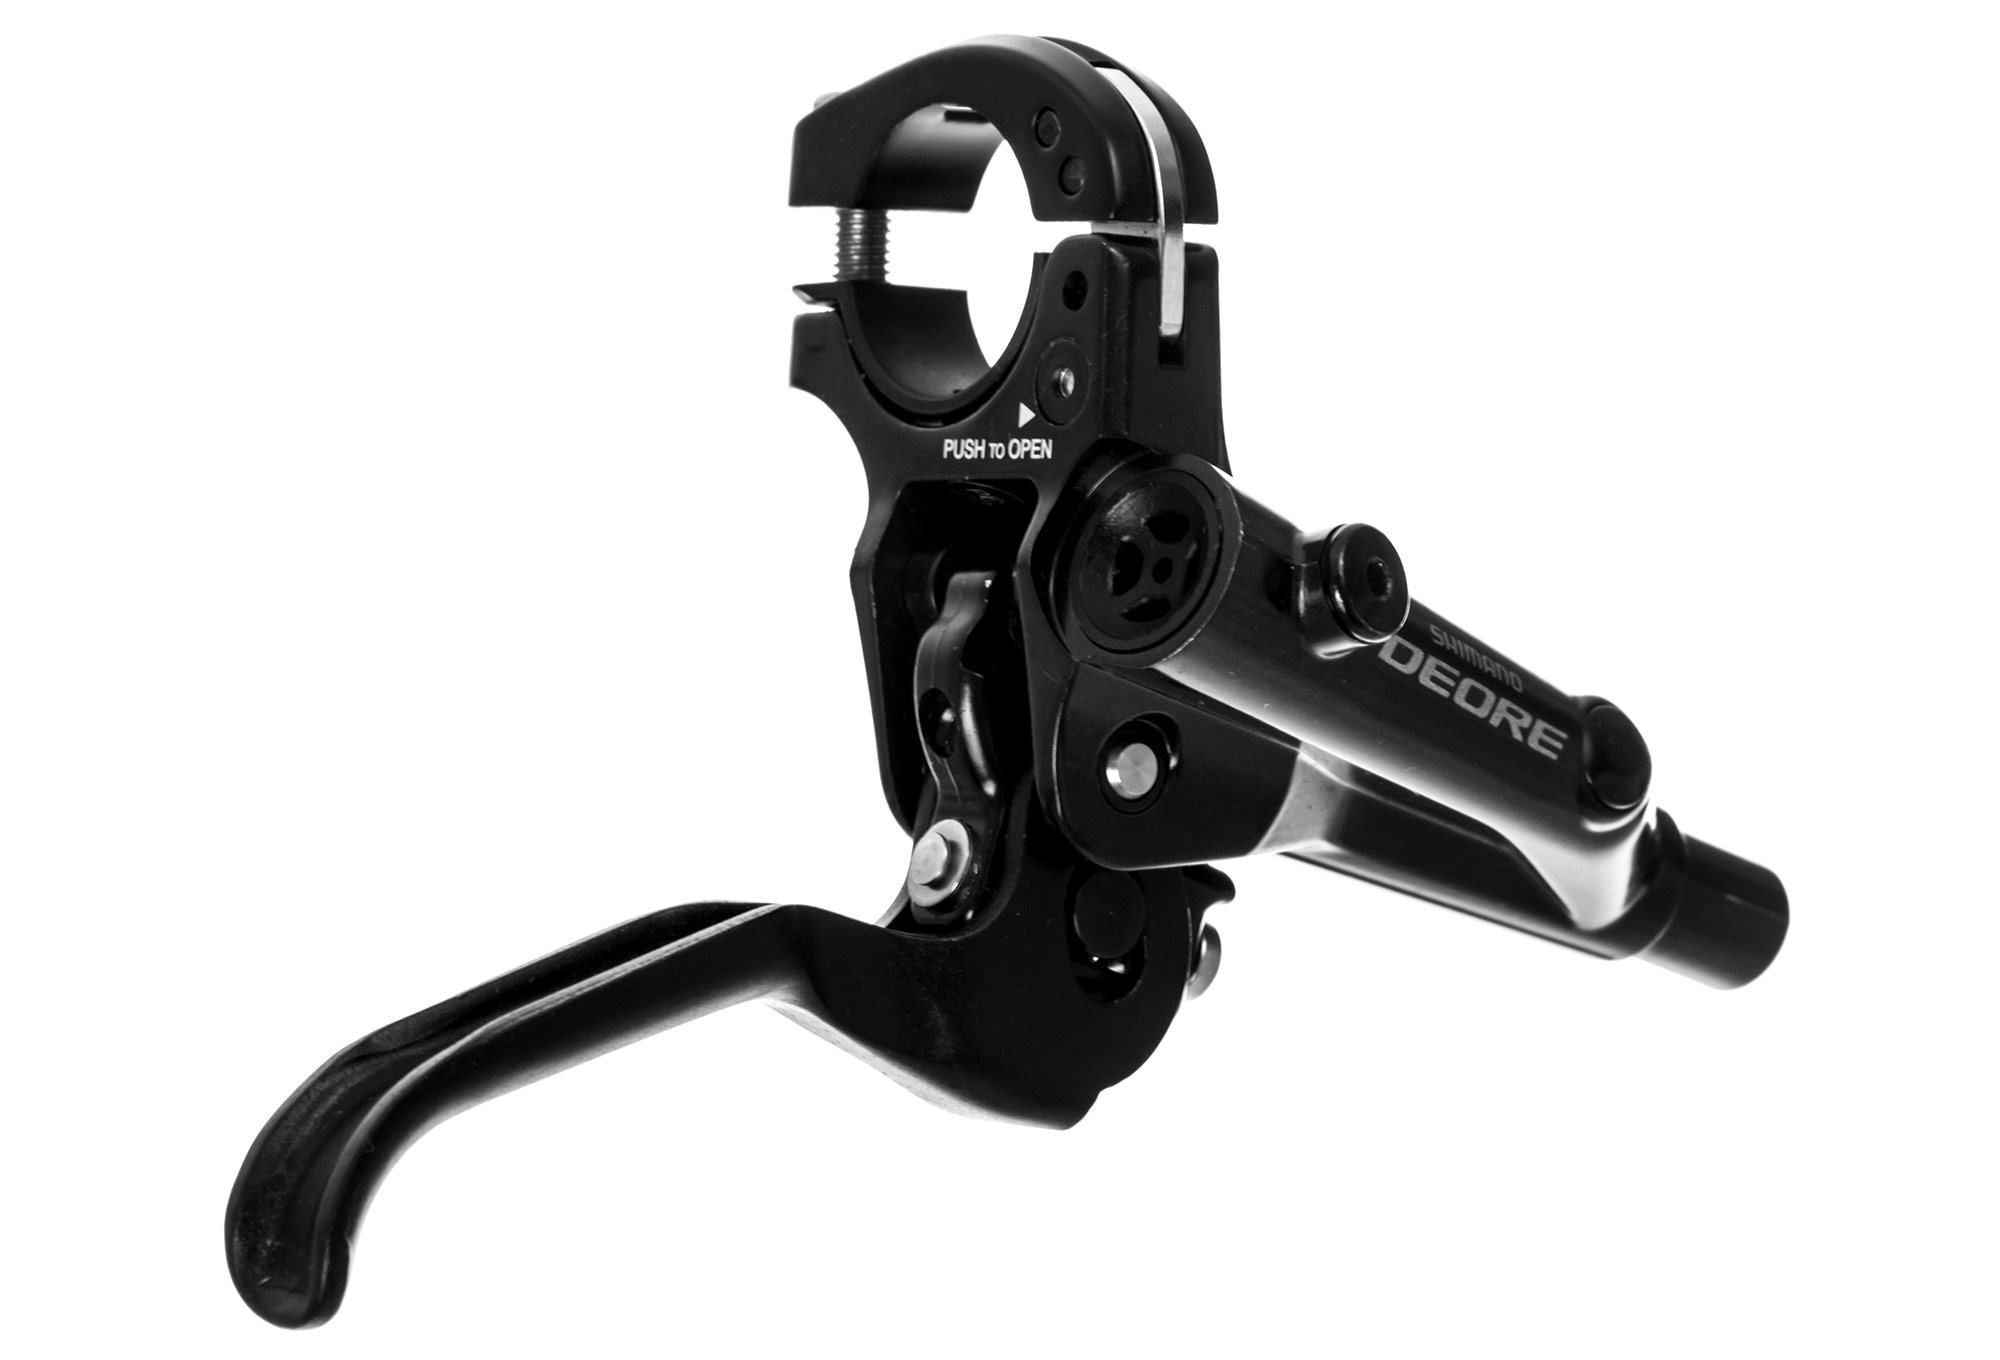 shimano deore m6000 review